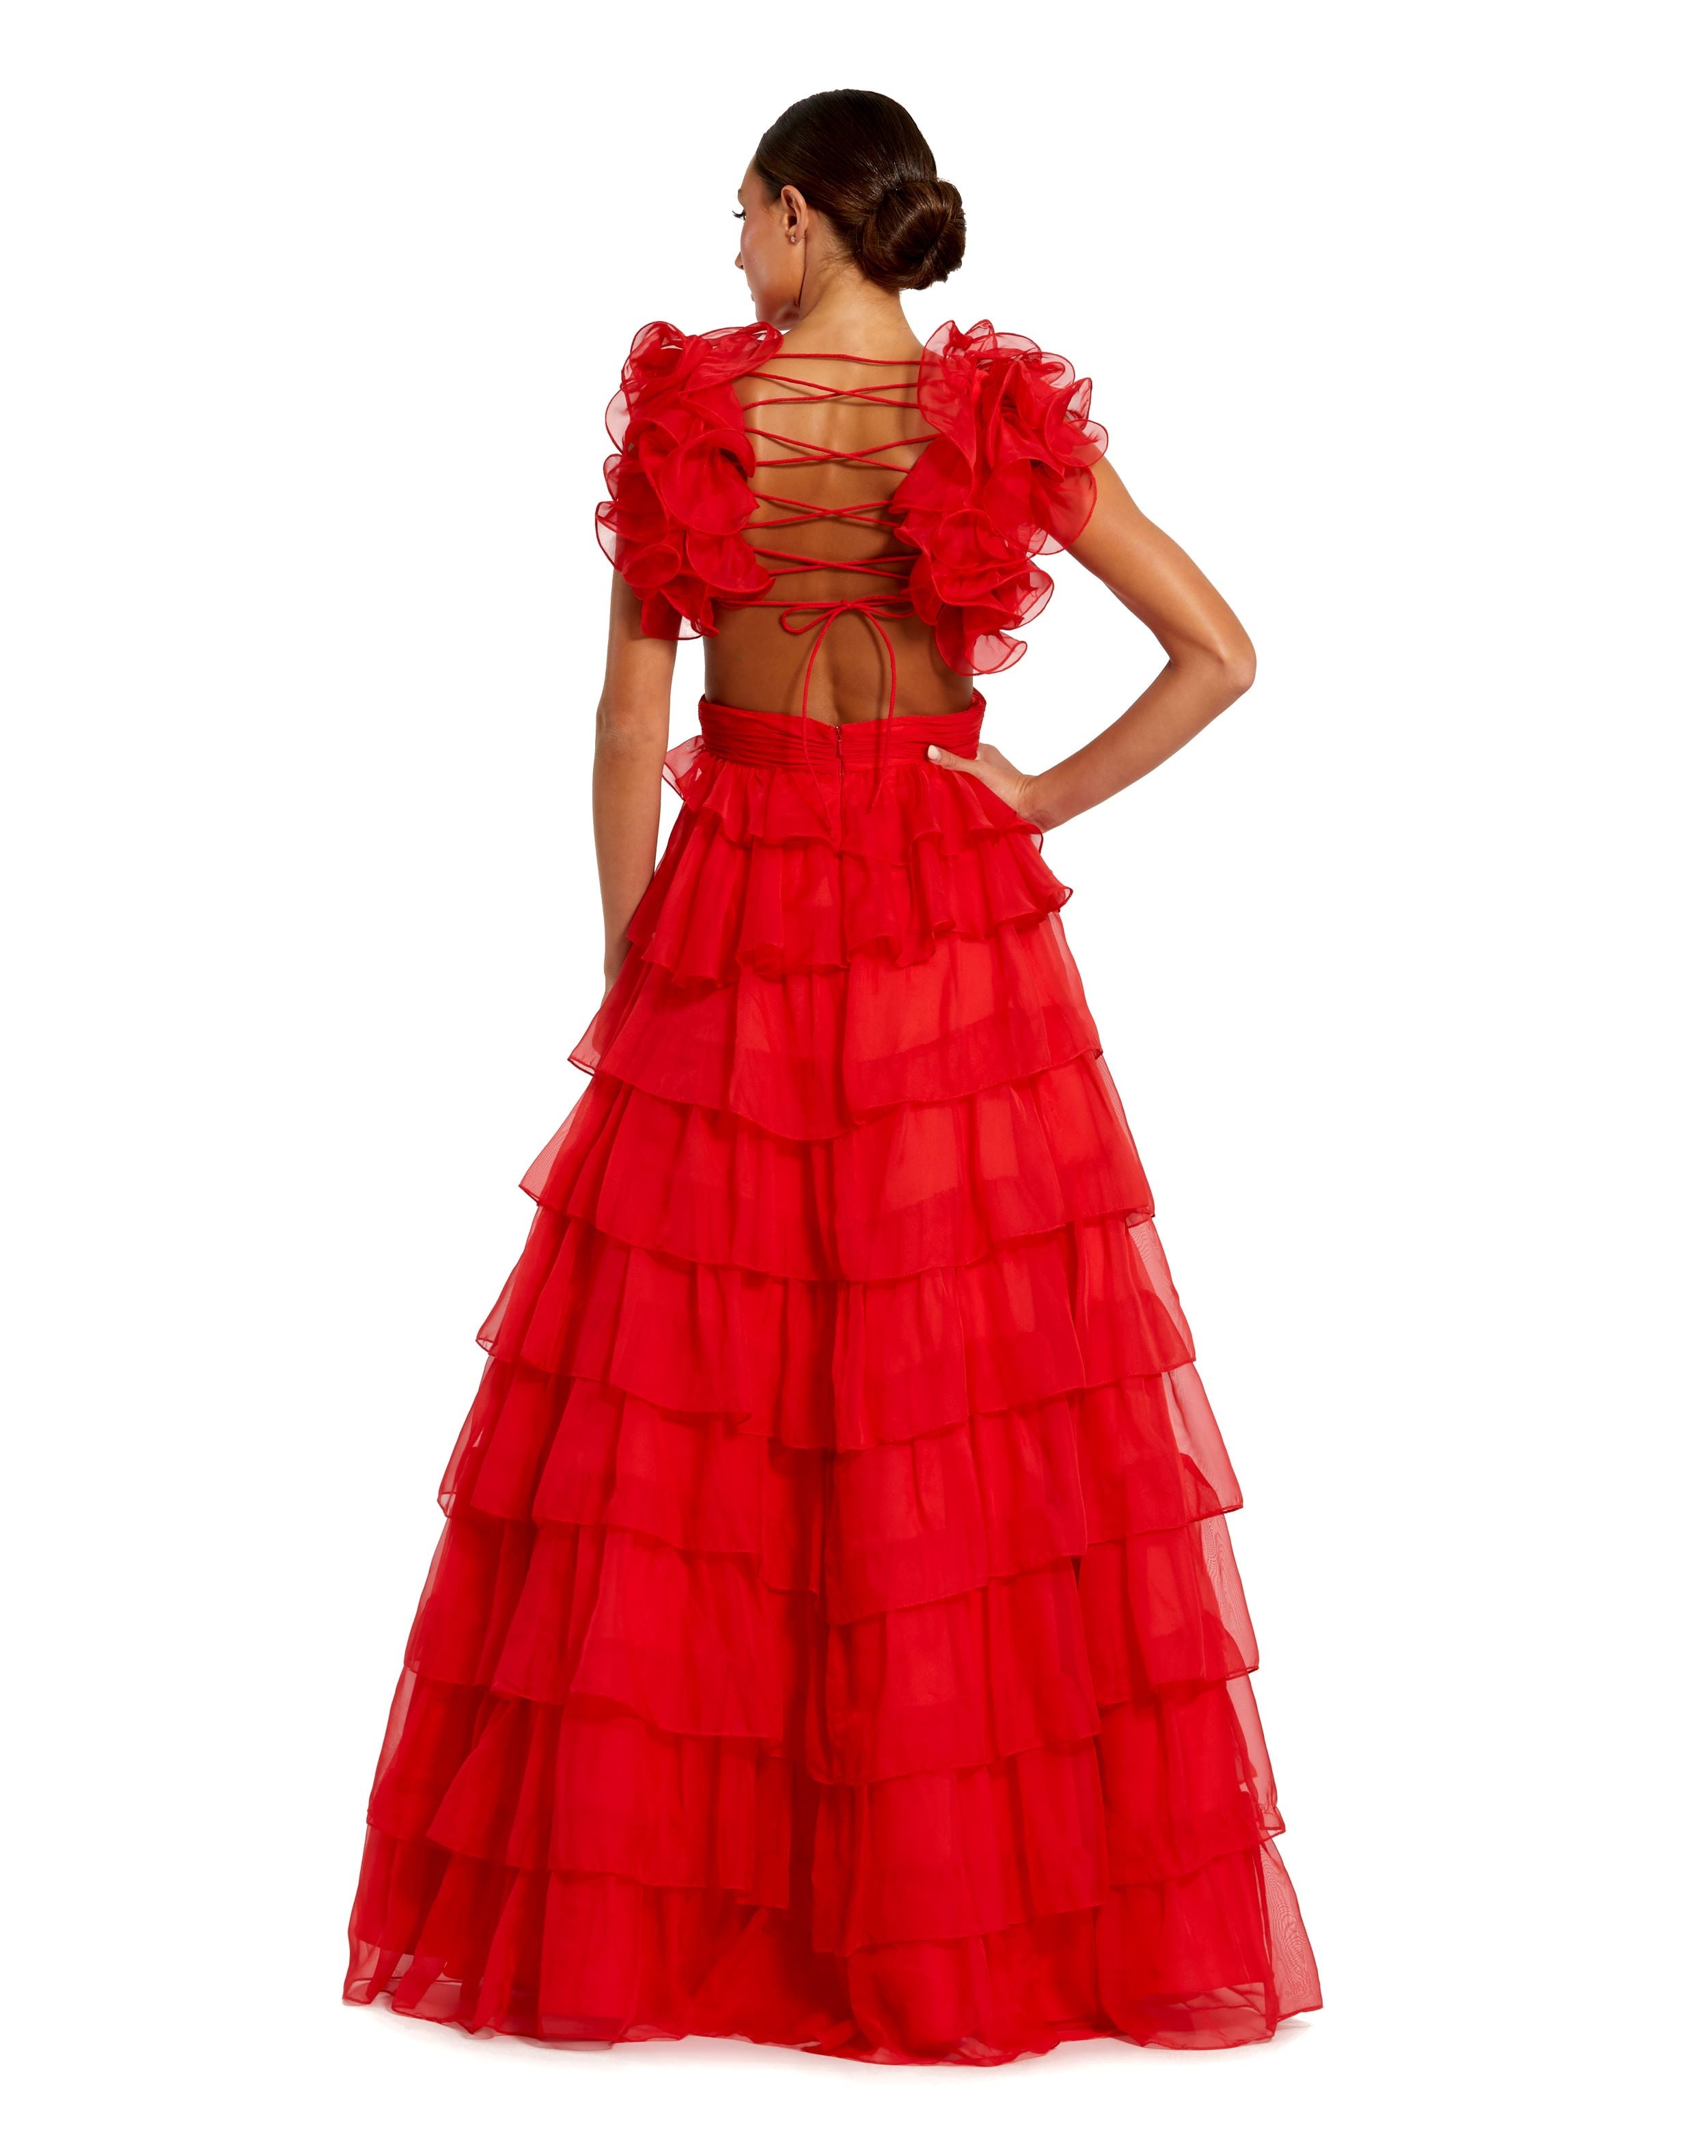 Ruffled Ballgown Lace Up Back